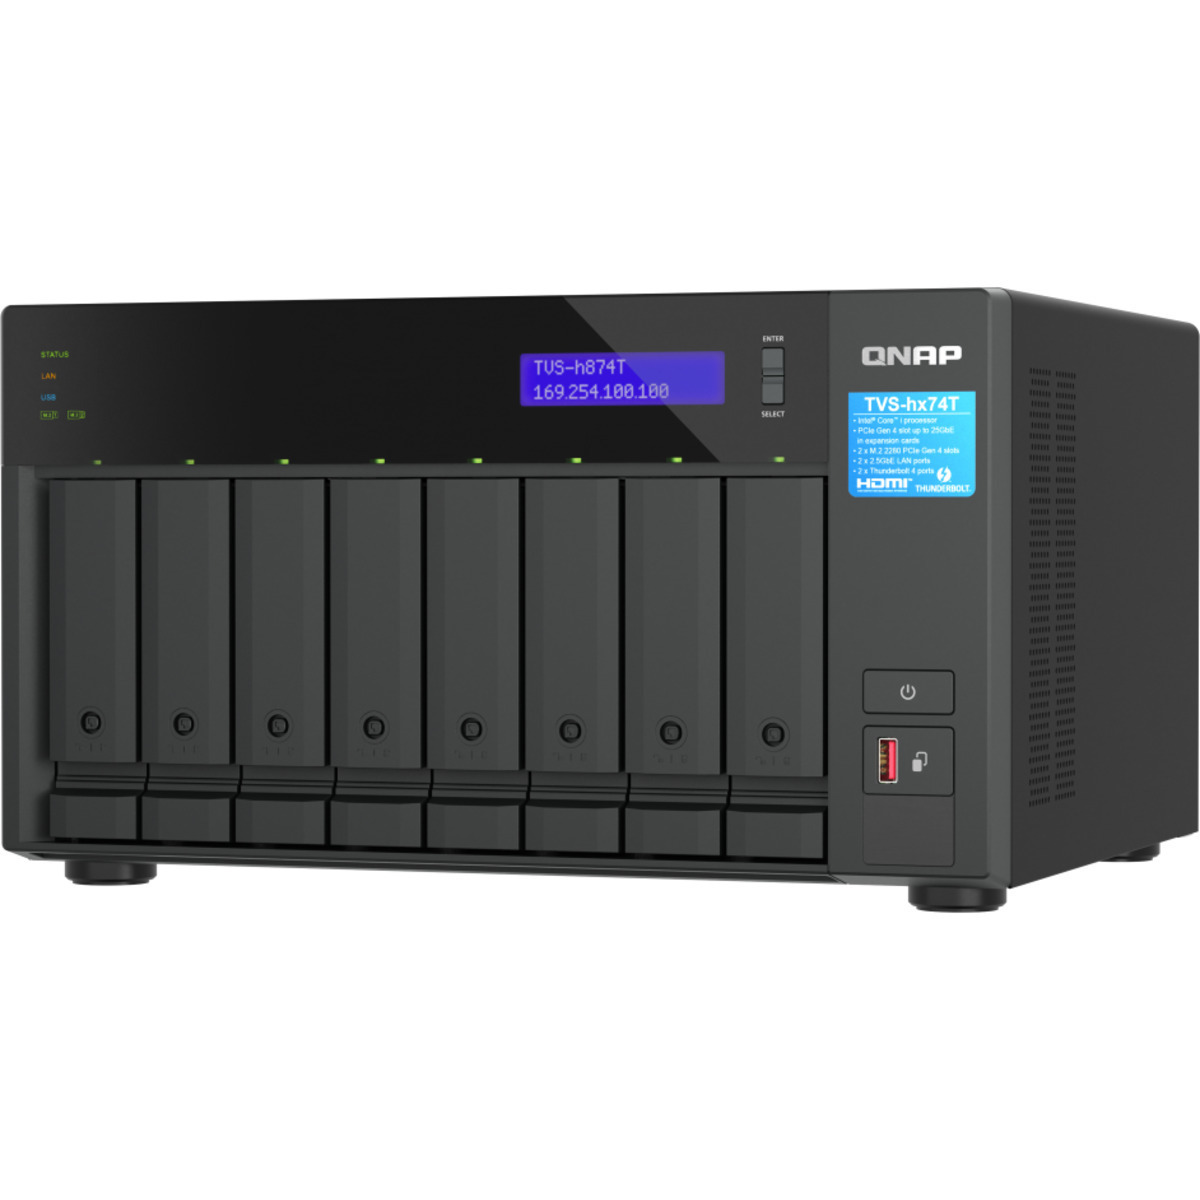 QNAP TVS-h874T-i7 DAS-NAS - Combo Direct + Network Storage Device Burn-In Tested Configurations